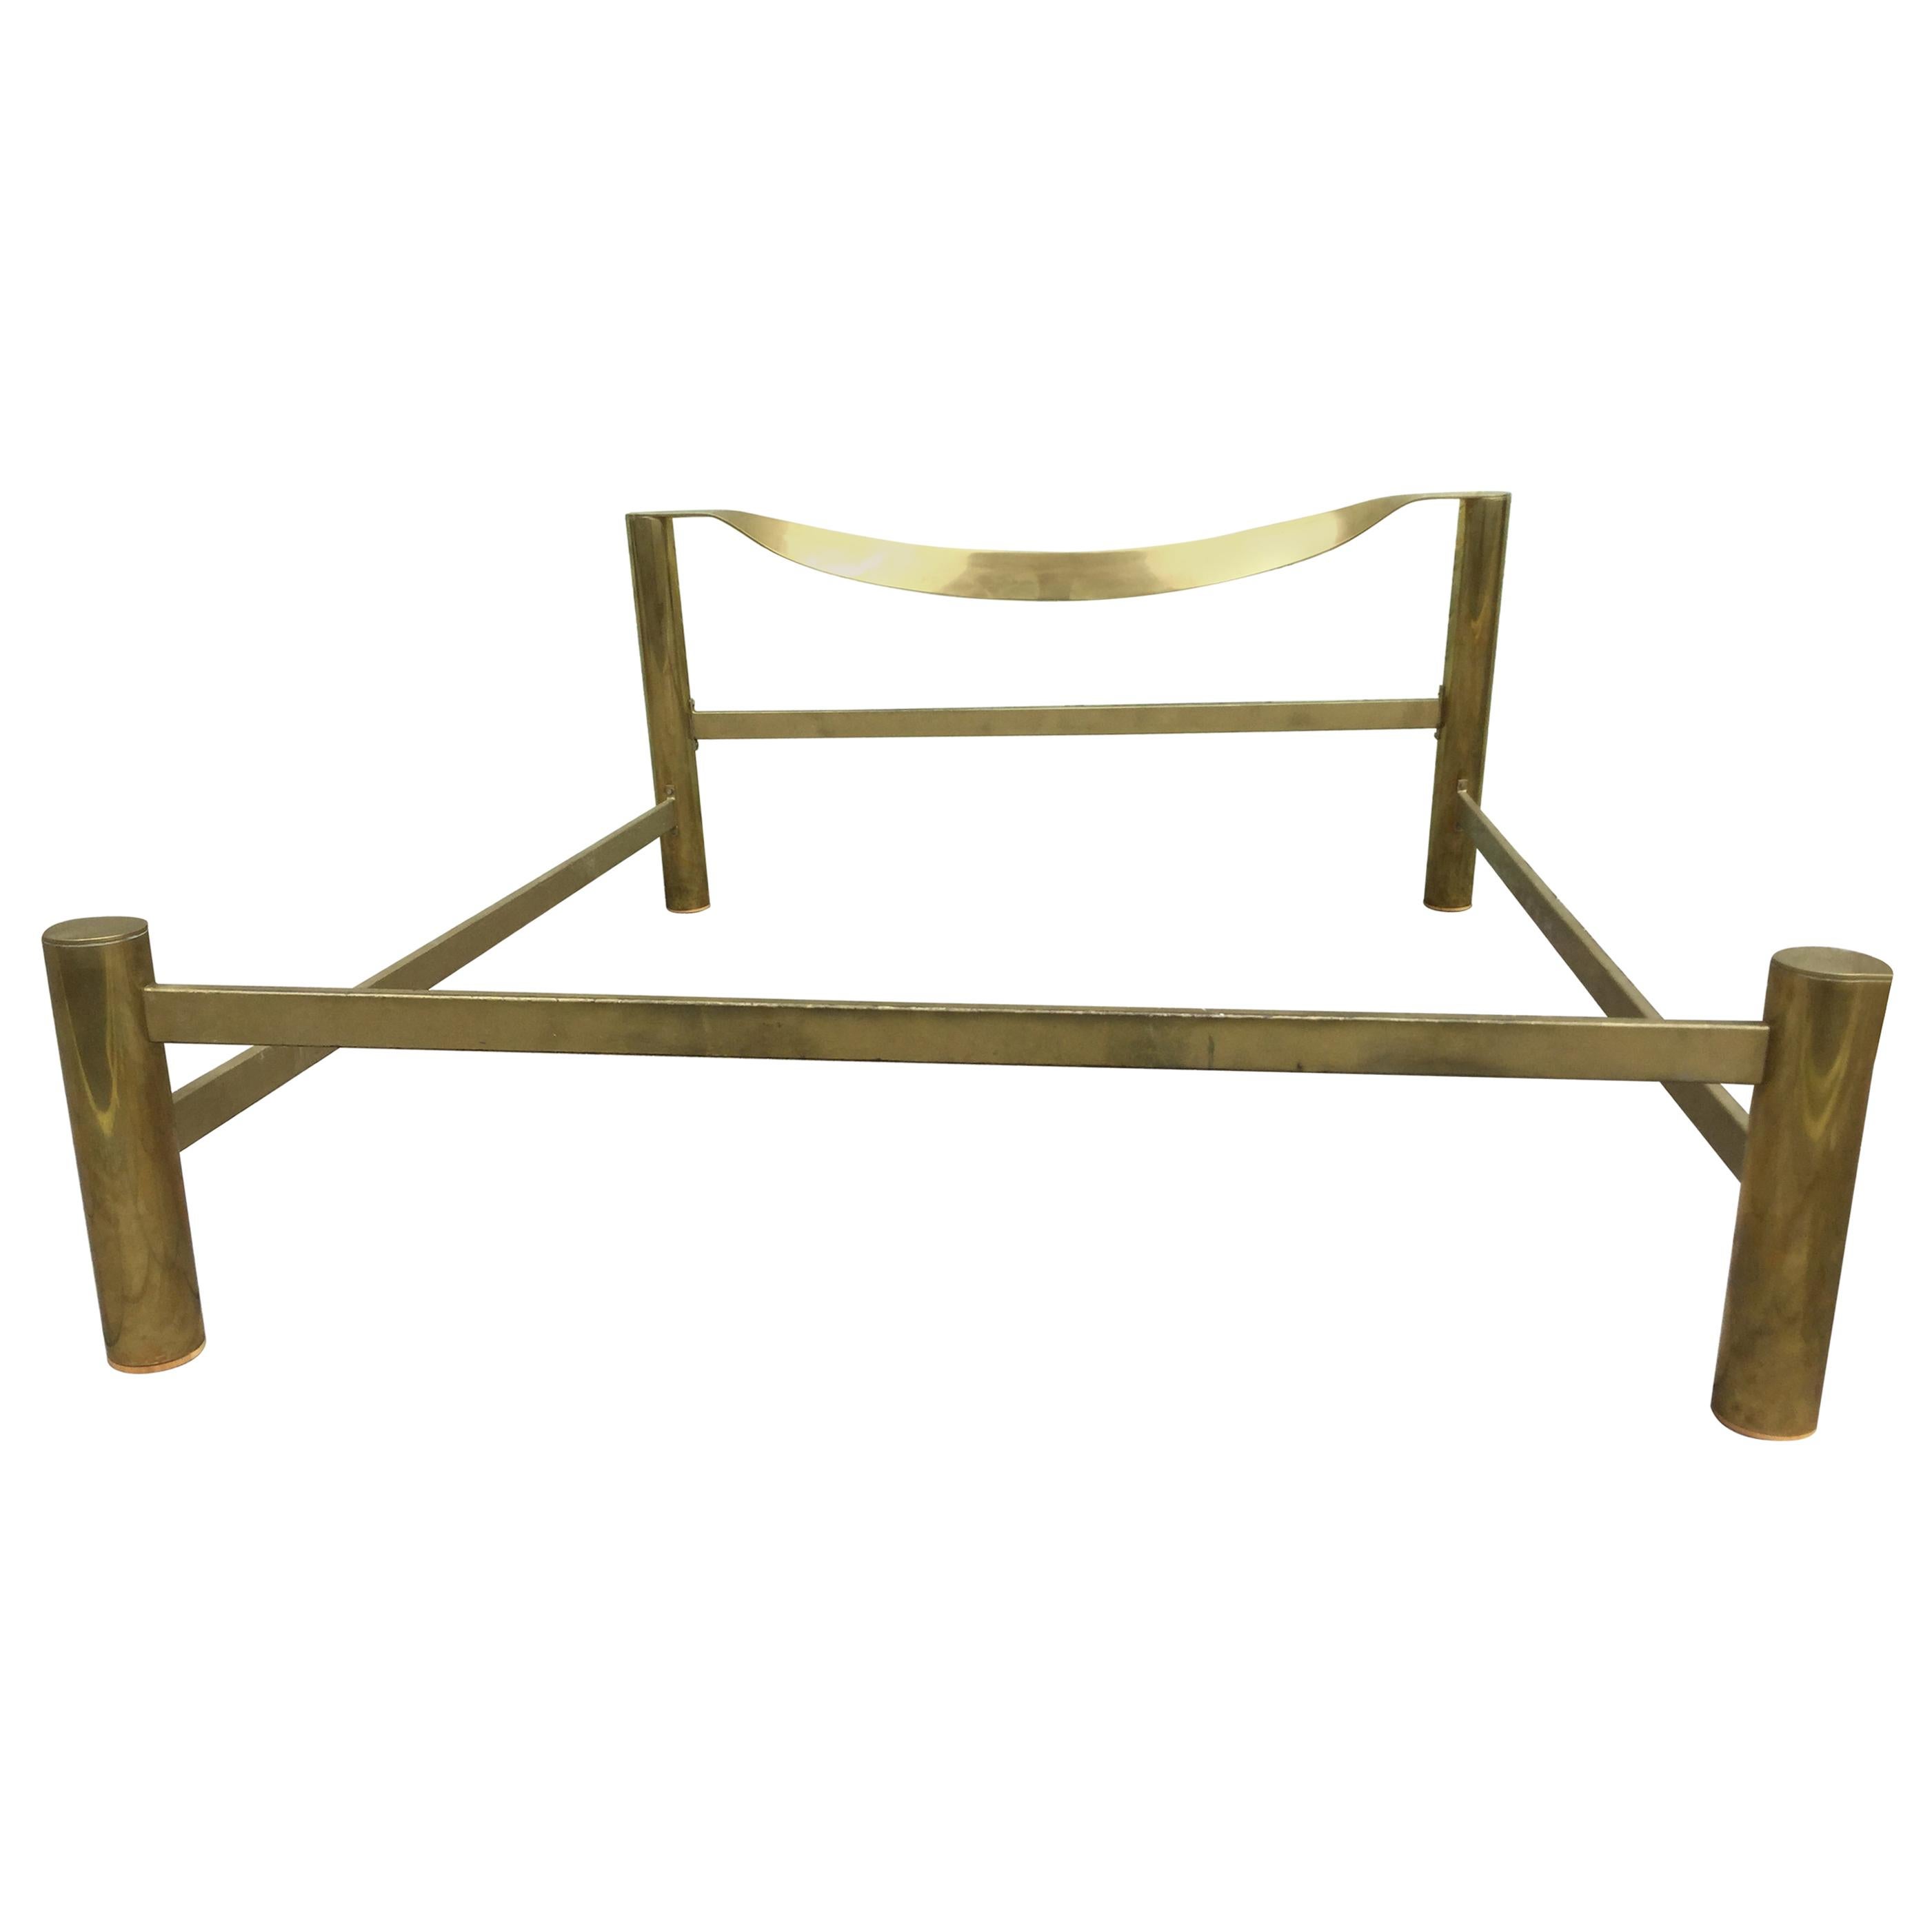 Mid-Century Modern Italian Brass Bed by Luciano Frigerio from 1970s